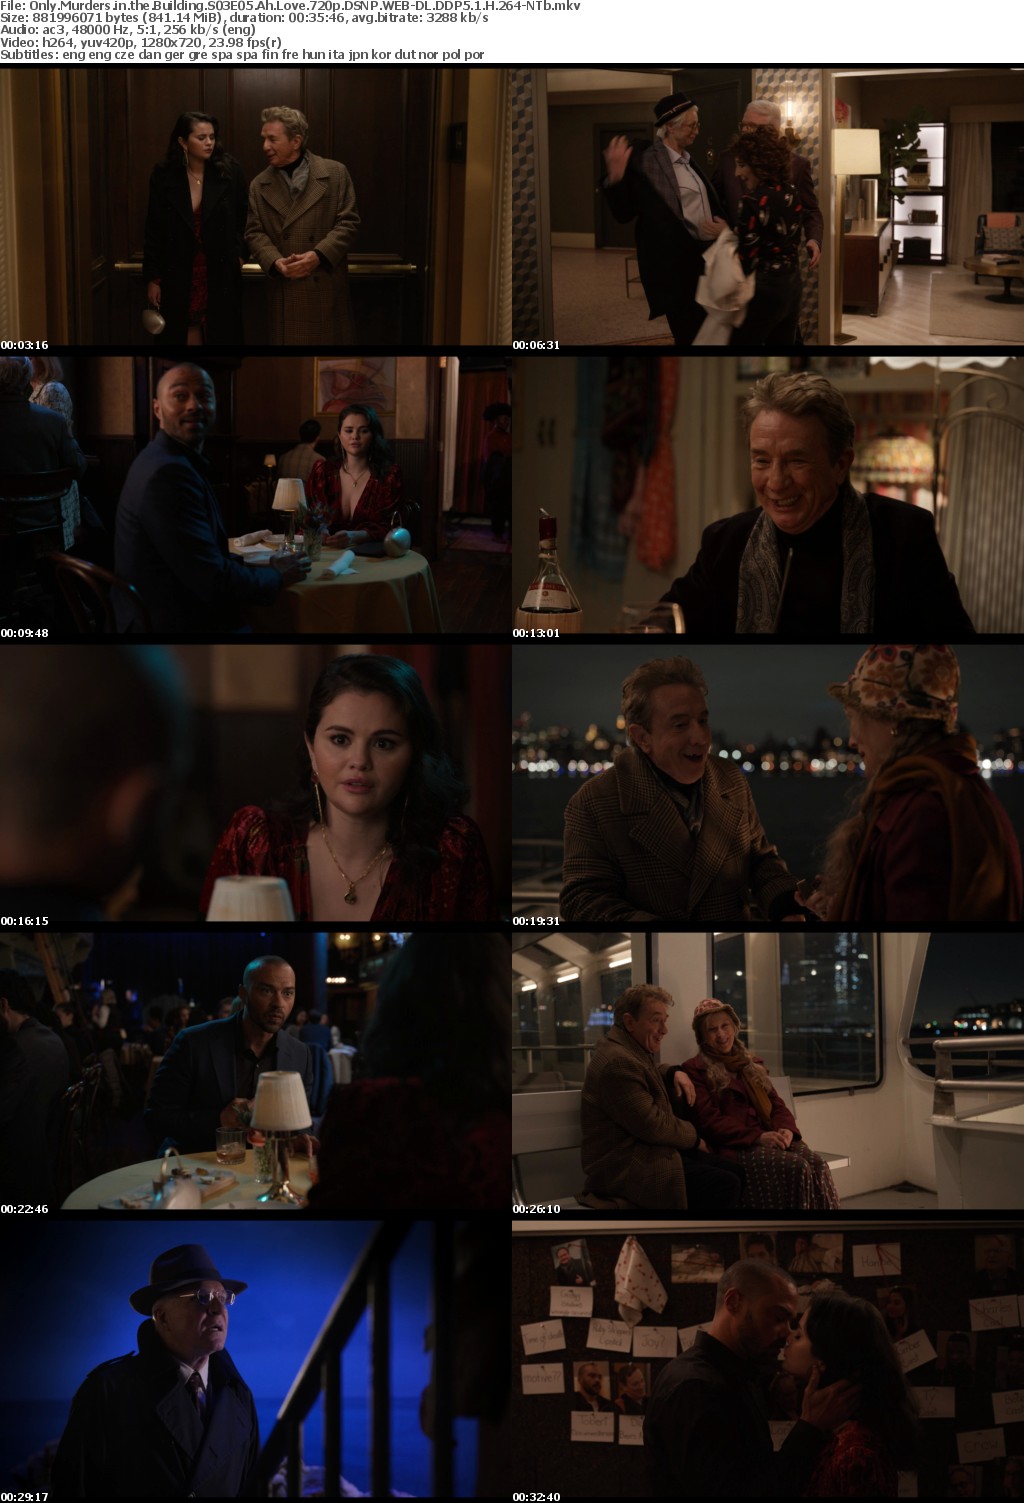 Only Murders in the Building S03E05 Ah Love 720p DSNP WEB-DL DDP5 1 H 264-NTb